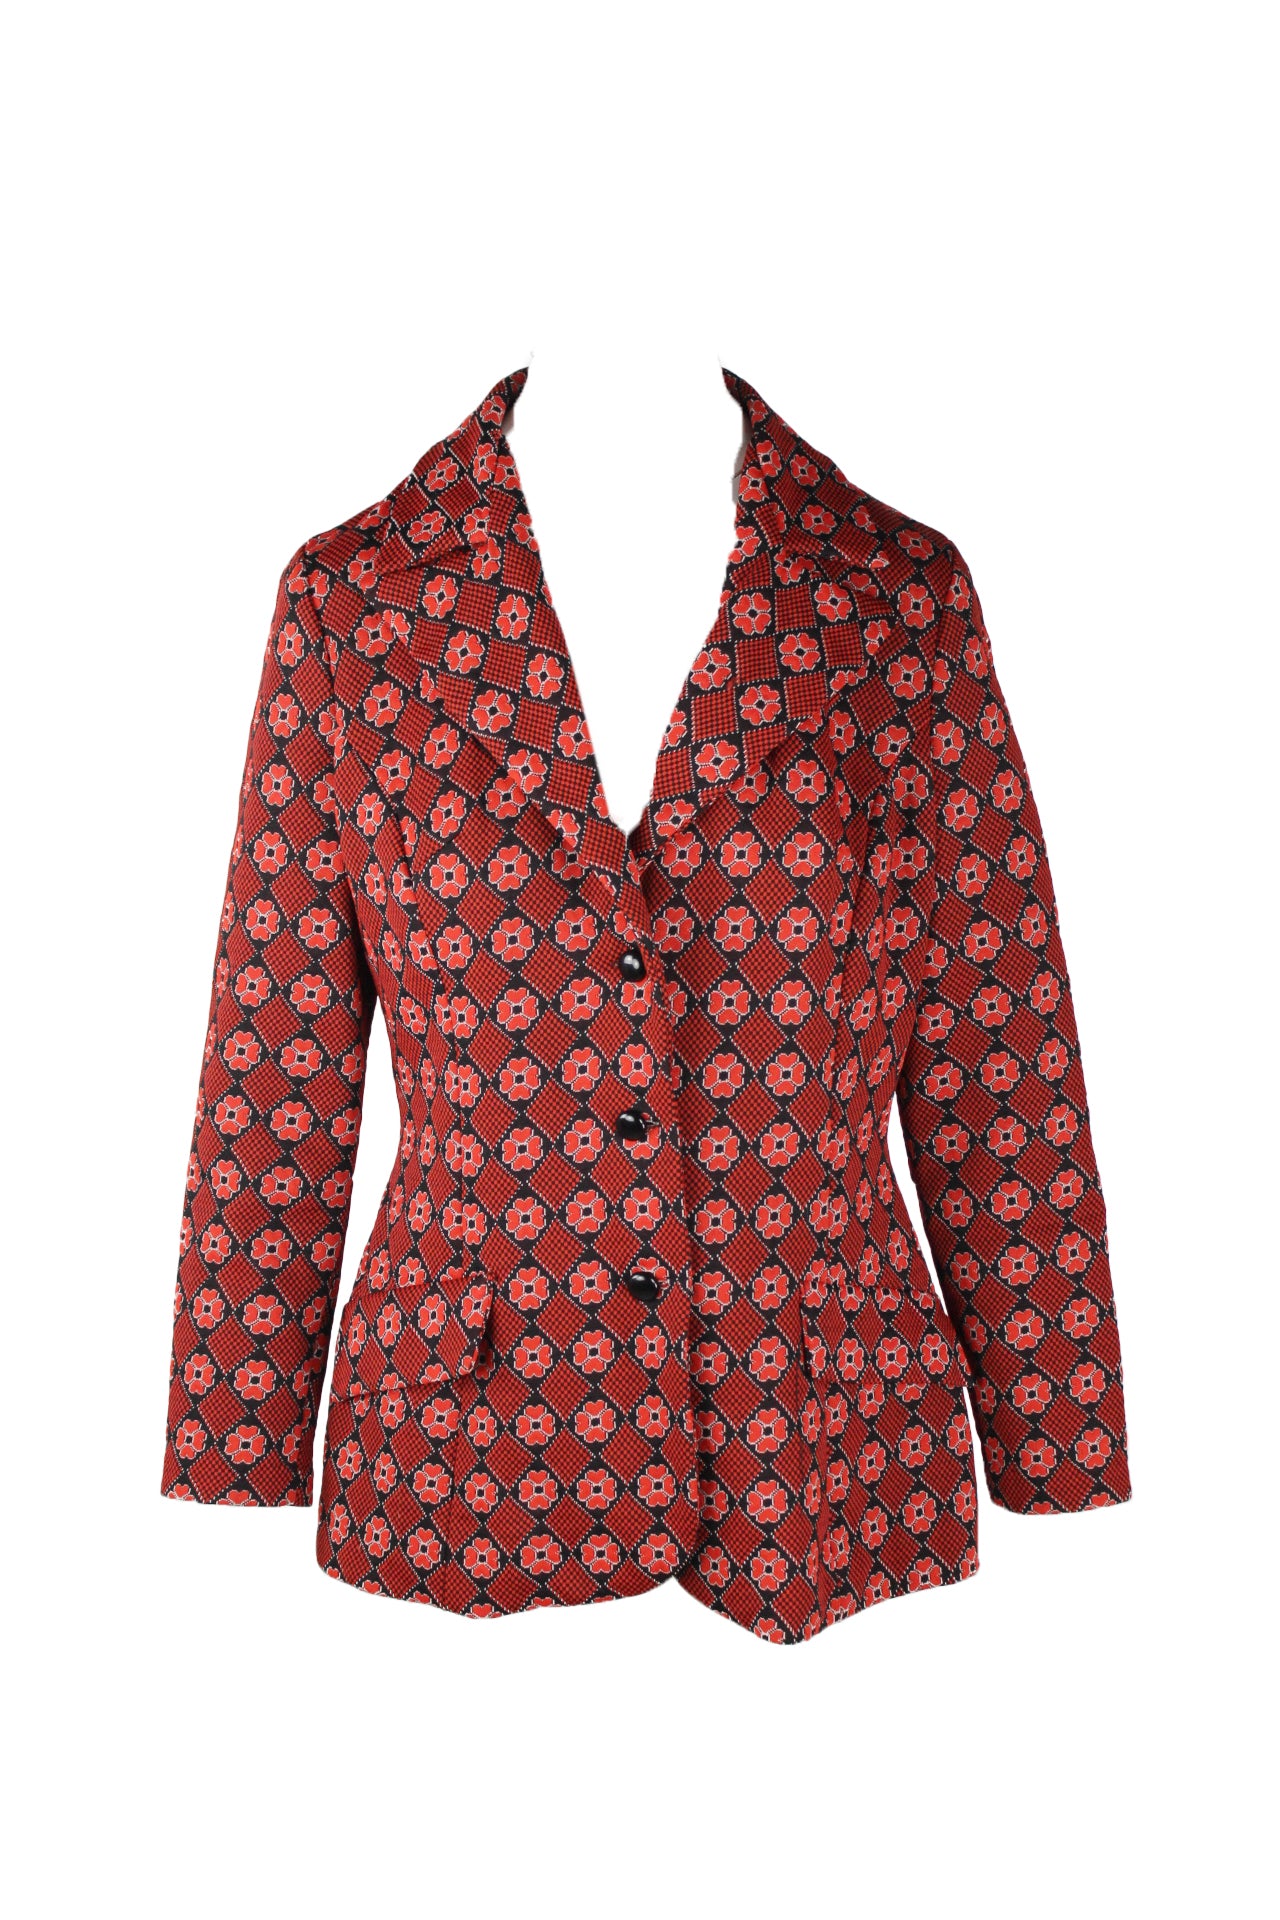 description: vintage red floral print long sleeve blazer. features lapel collar, flaps at front (no pocket), single breasted button closure at center front, and fitted style. 